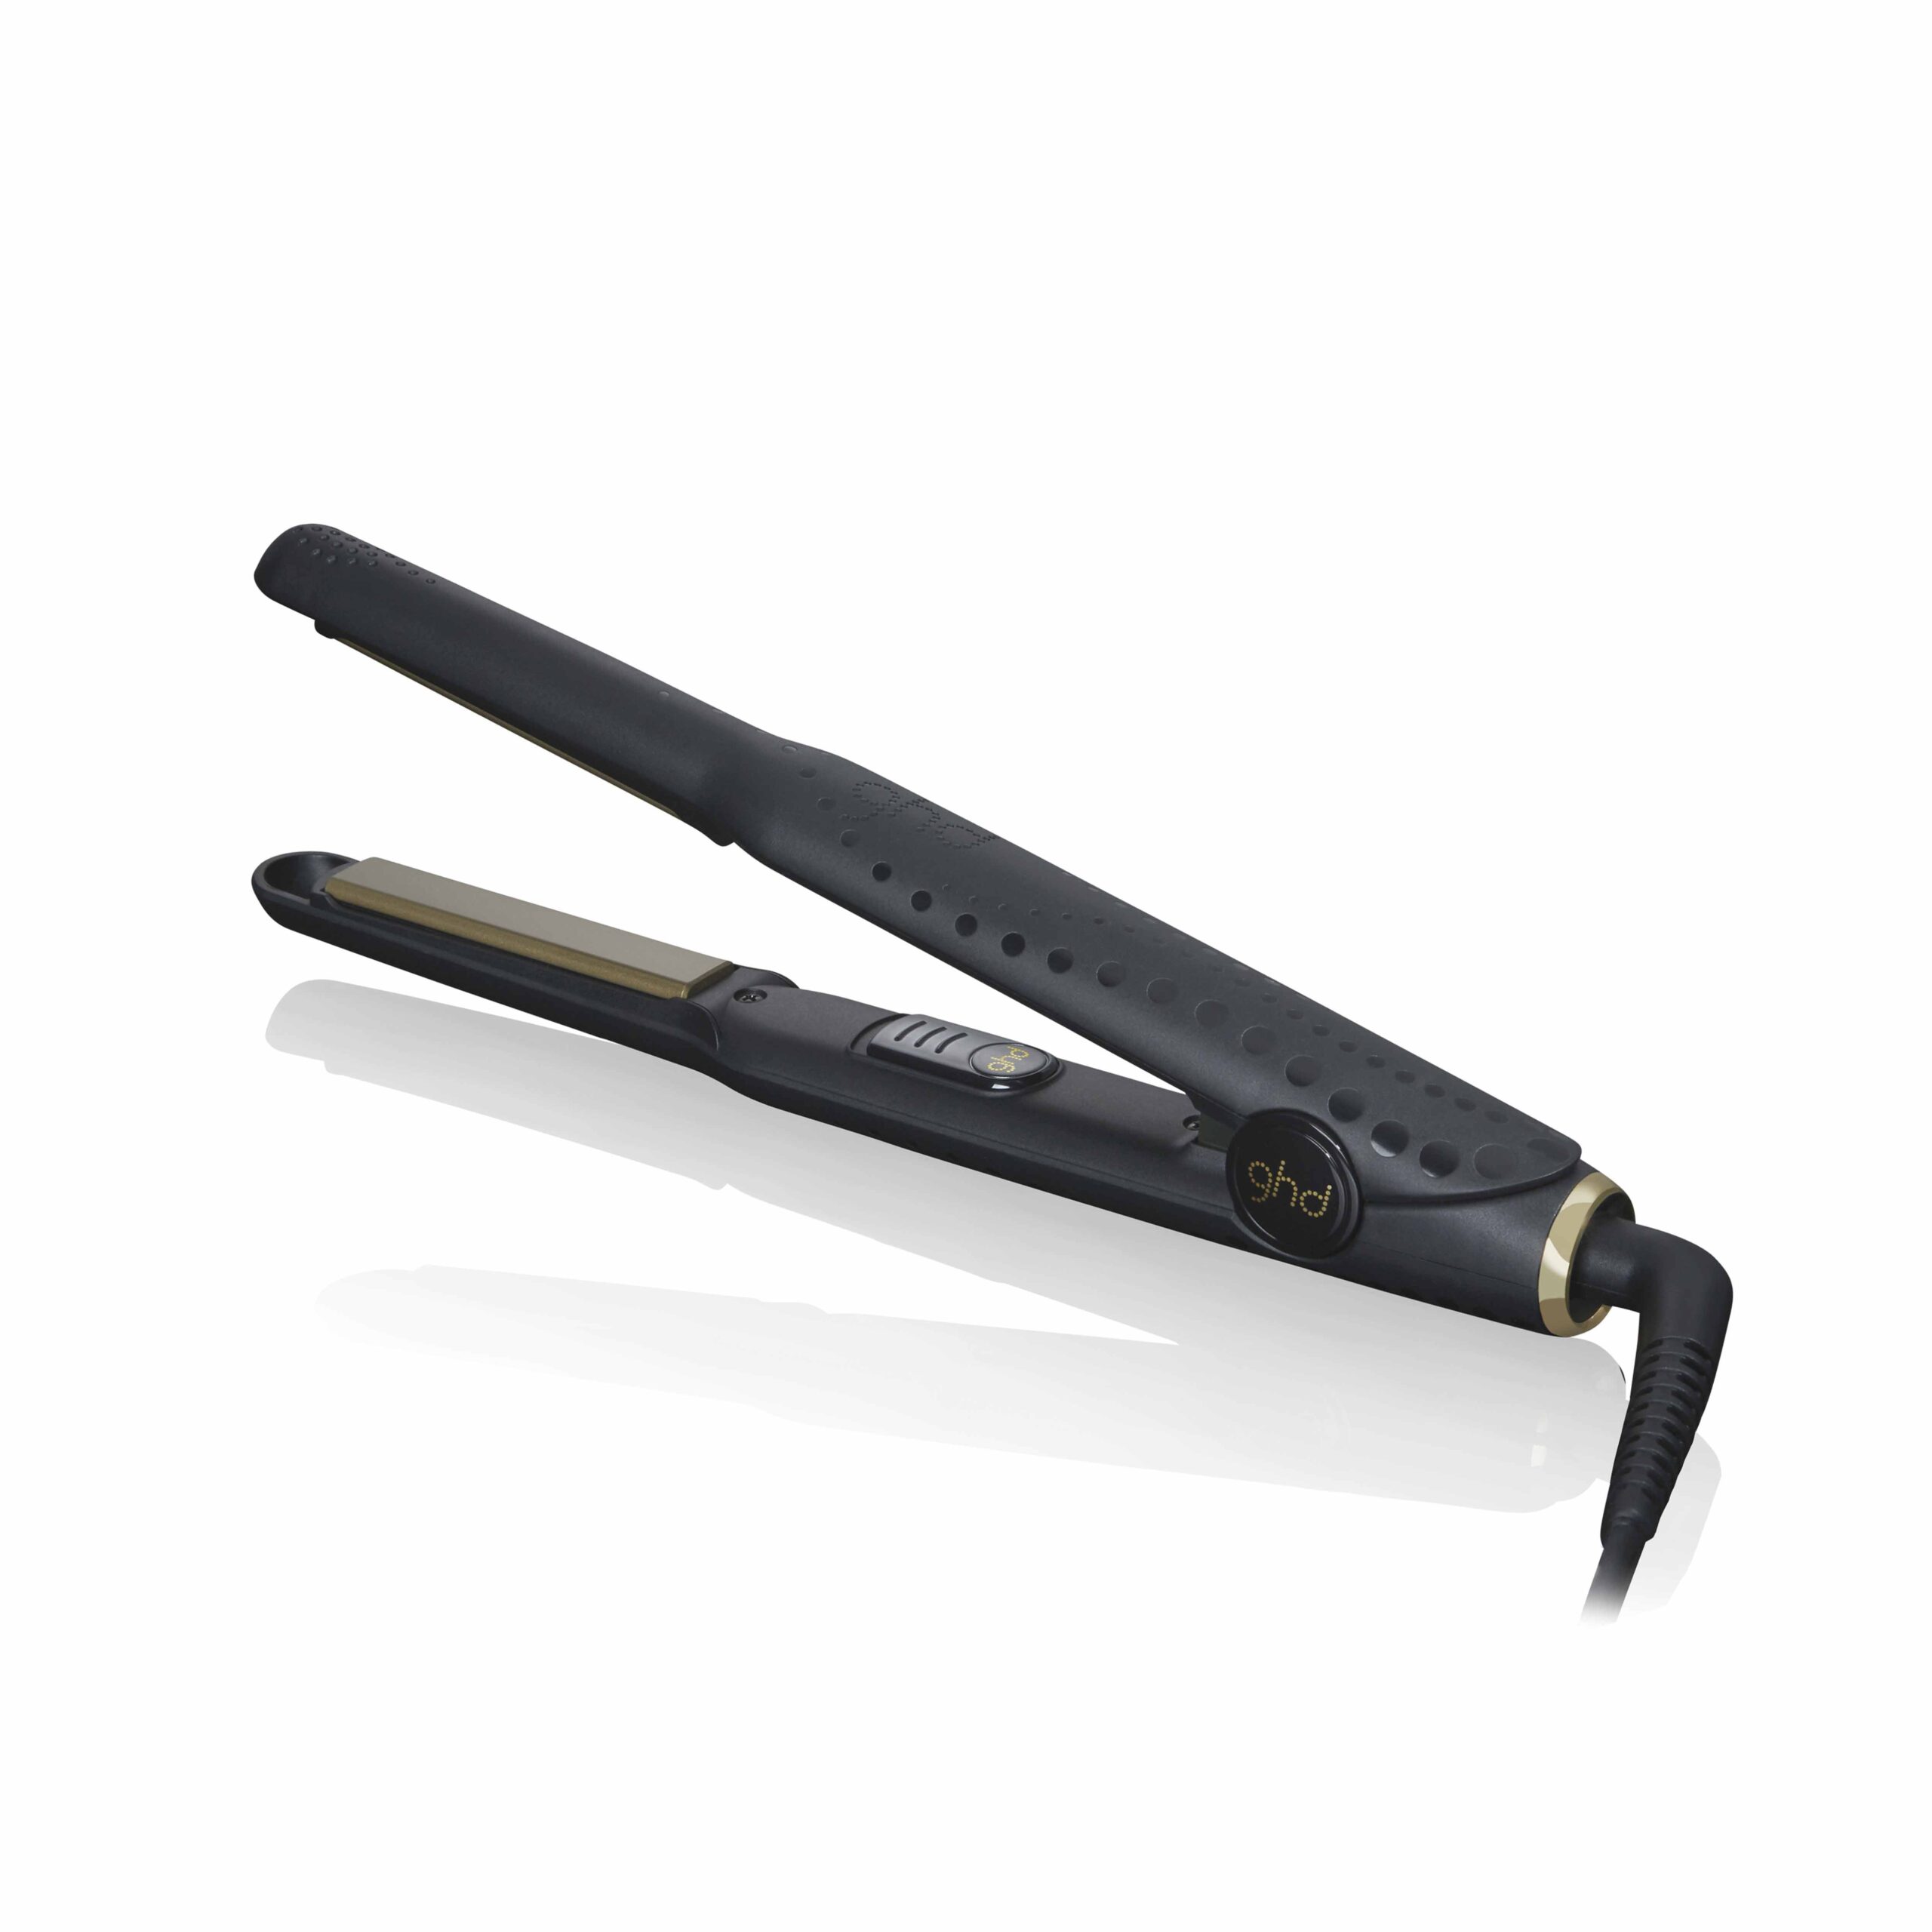 Features Of The Ghd Mini Stylers